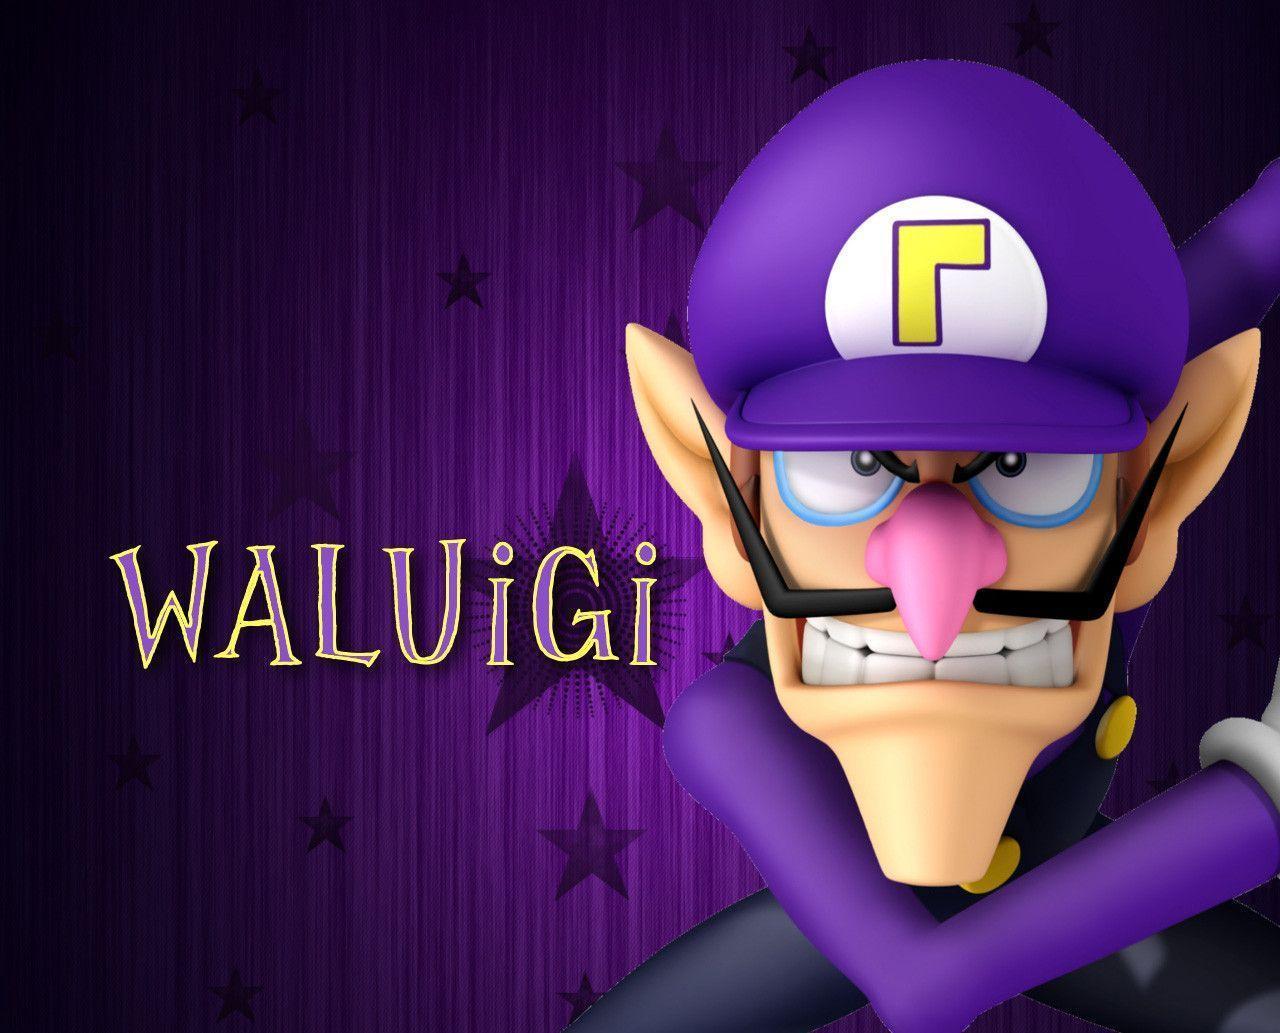 Find more Waluigi Wallpapers. 